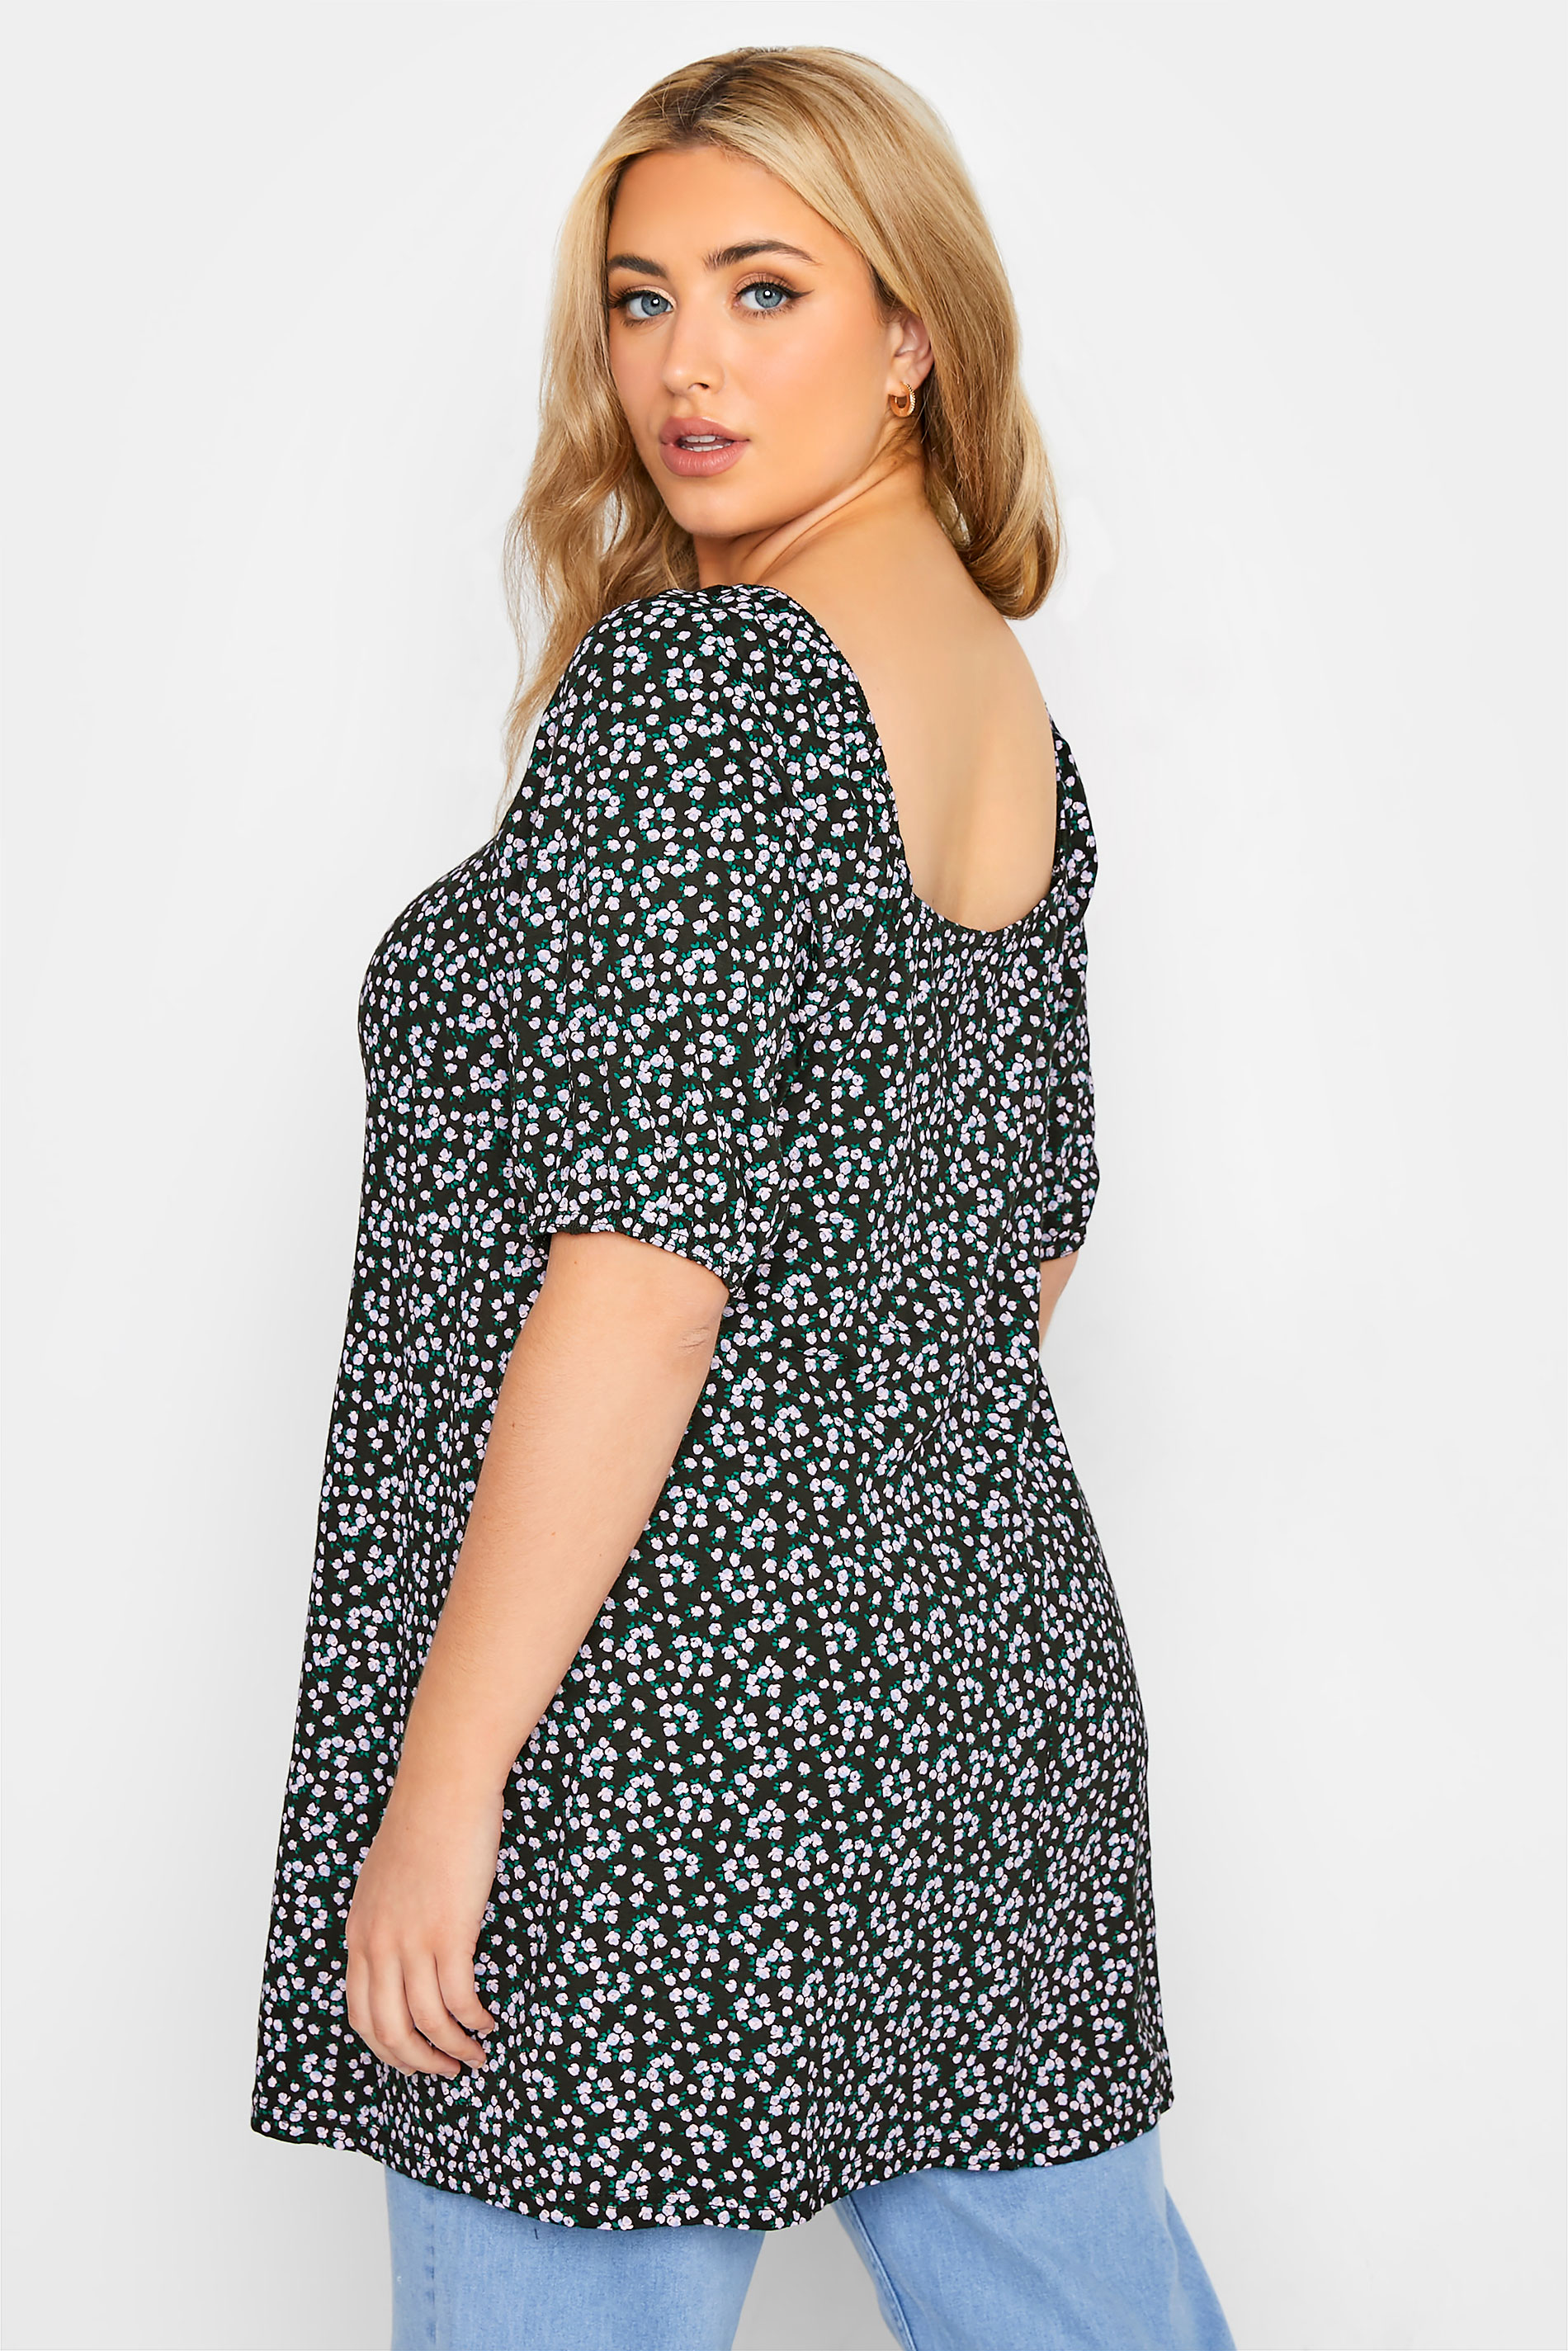 LIMITED COLLECTION Plus Size Black Ditsy Floral Top | Yours Clothing 3